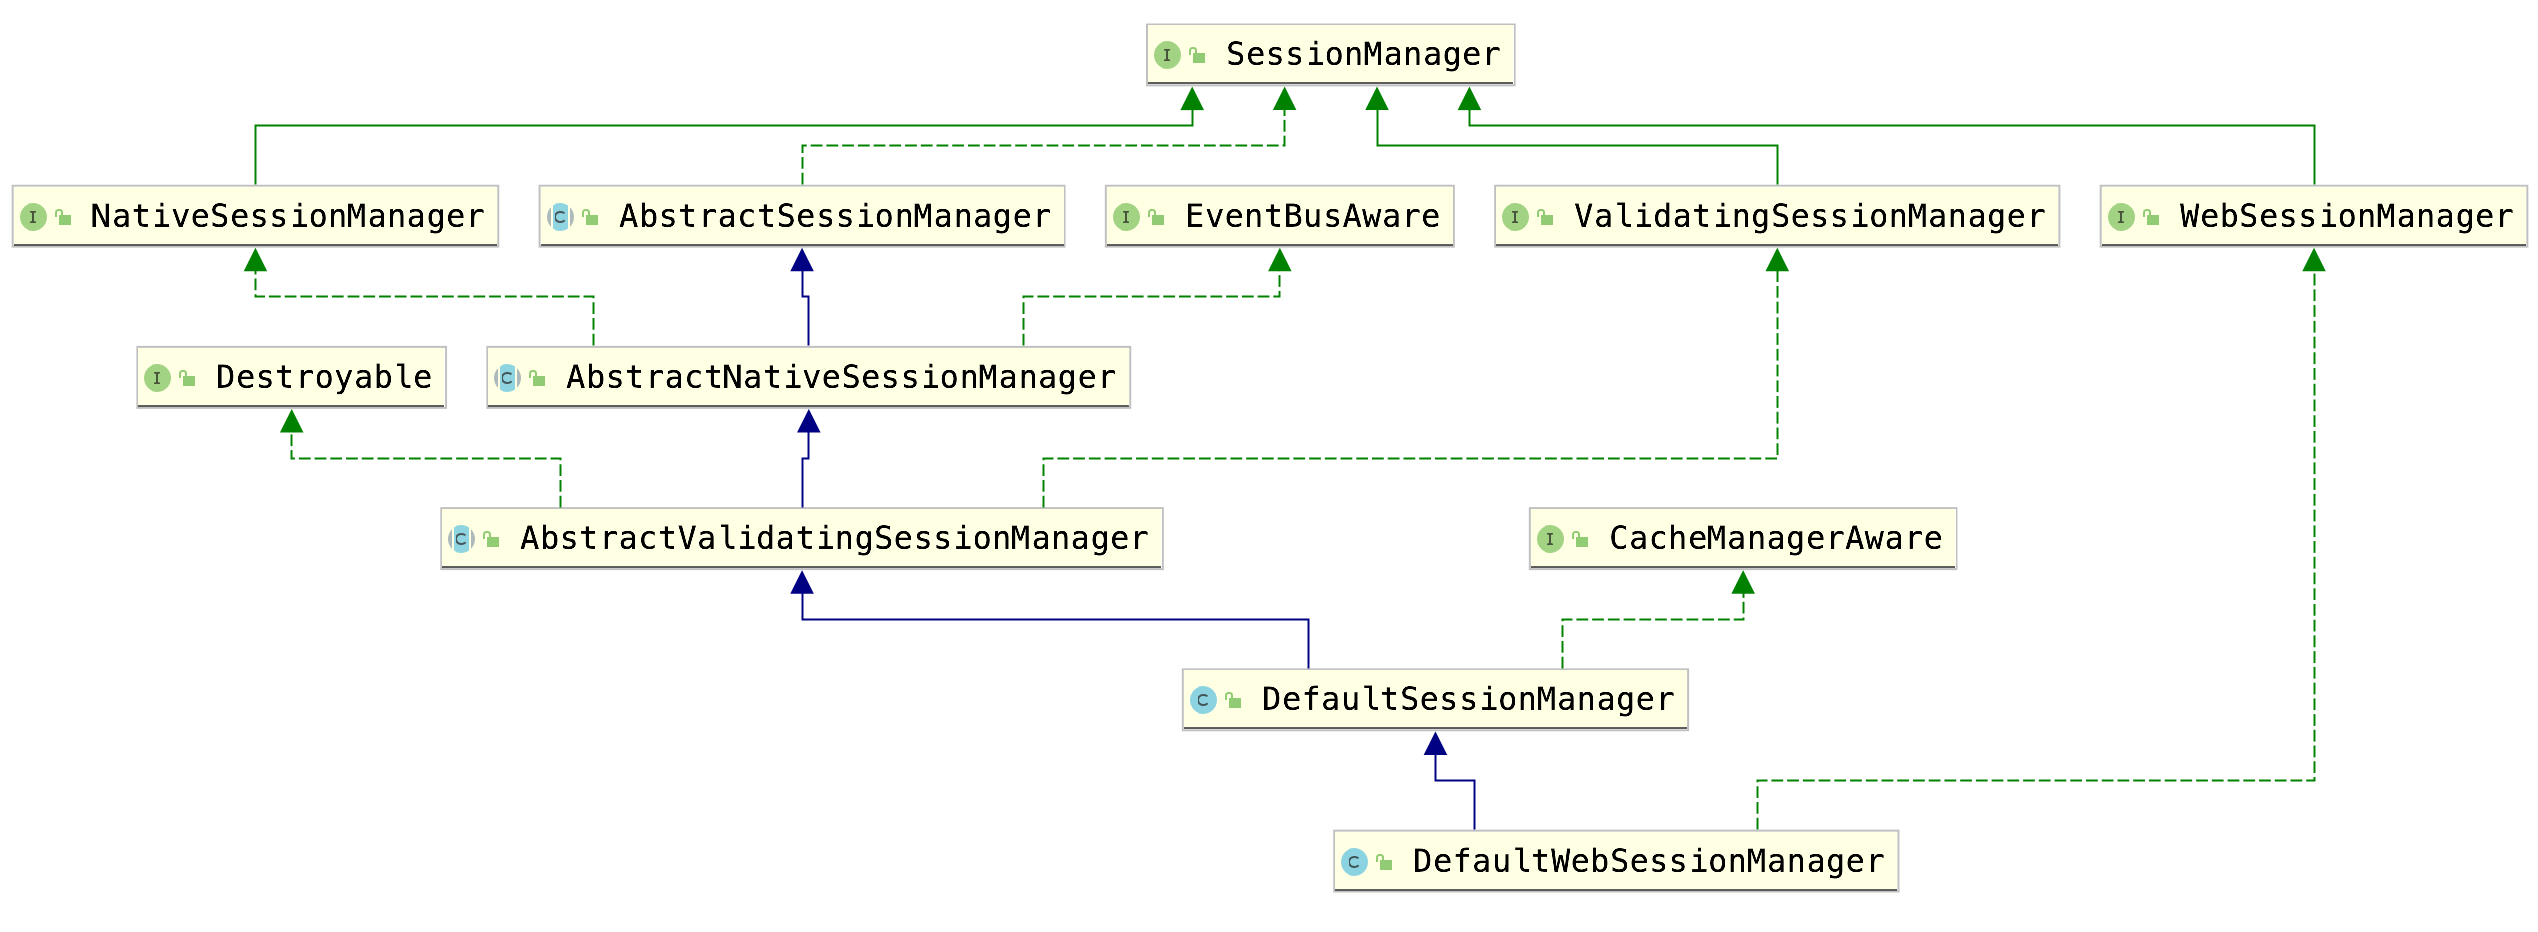 DefaultWebSessionManager structure